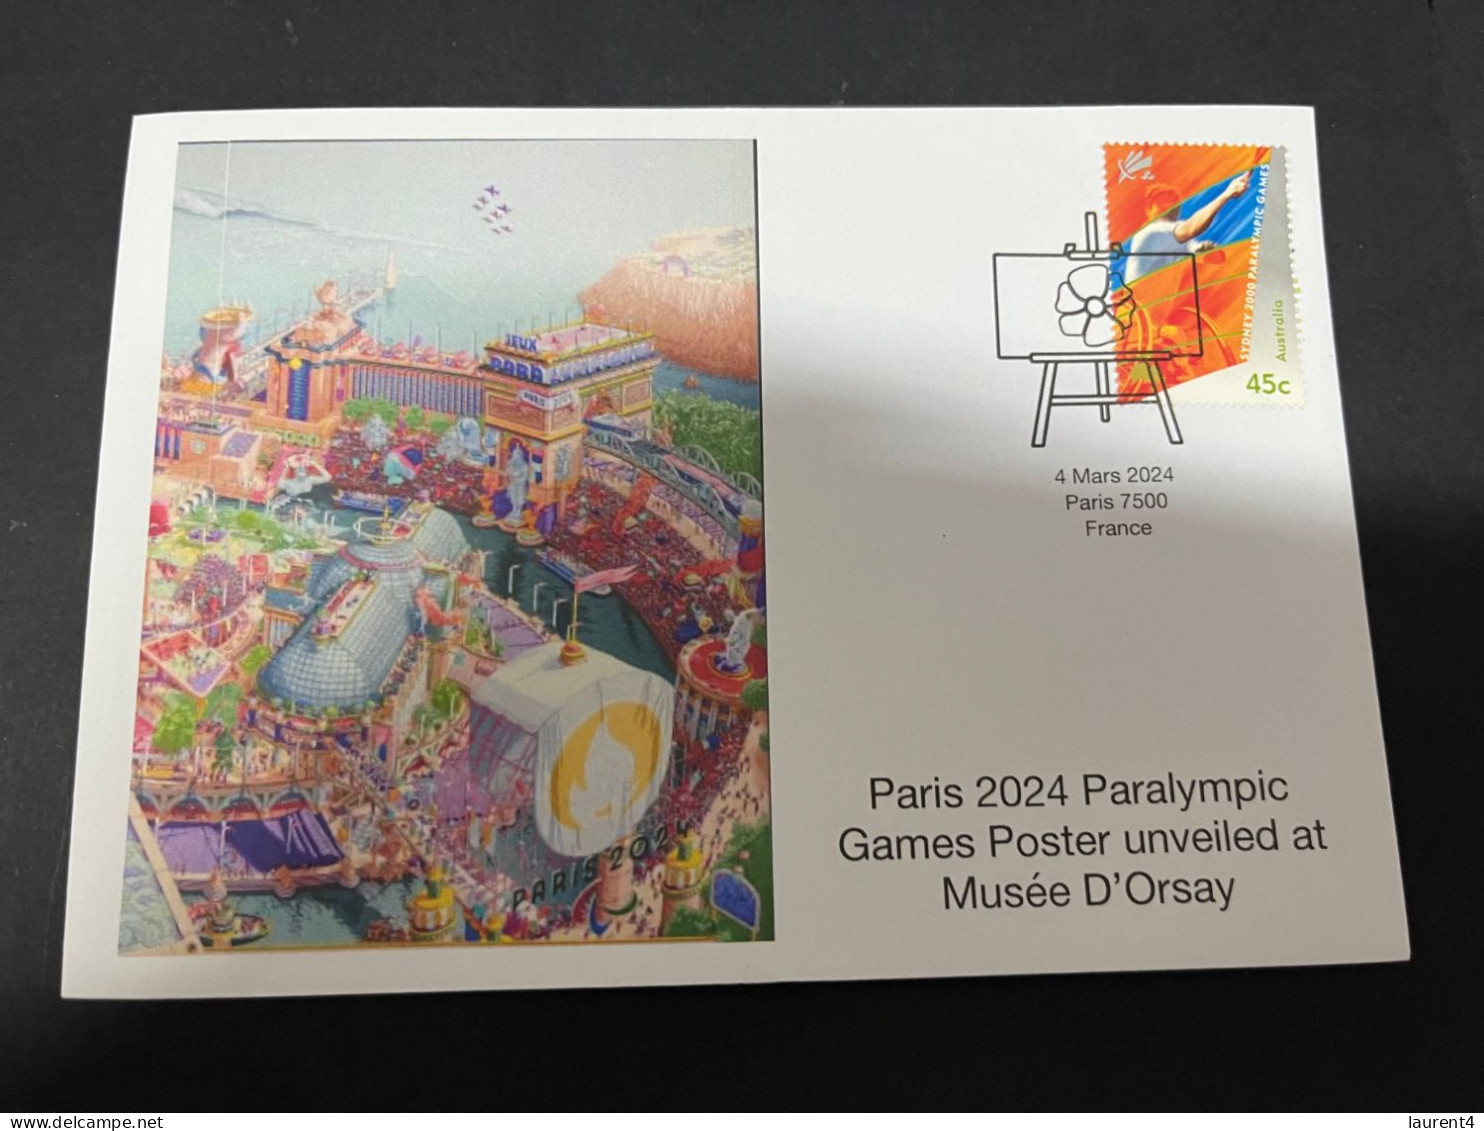 6-3-2024 (2 Y 17) Paris Olympic Games 2024 - 2 Olympic Games Posters Unveil At Musée D'Orsay (Paralympics) - Sommer 2024: Paris